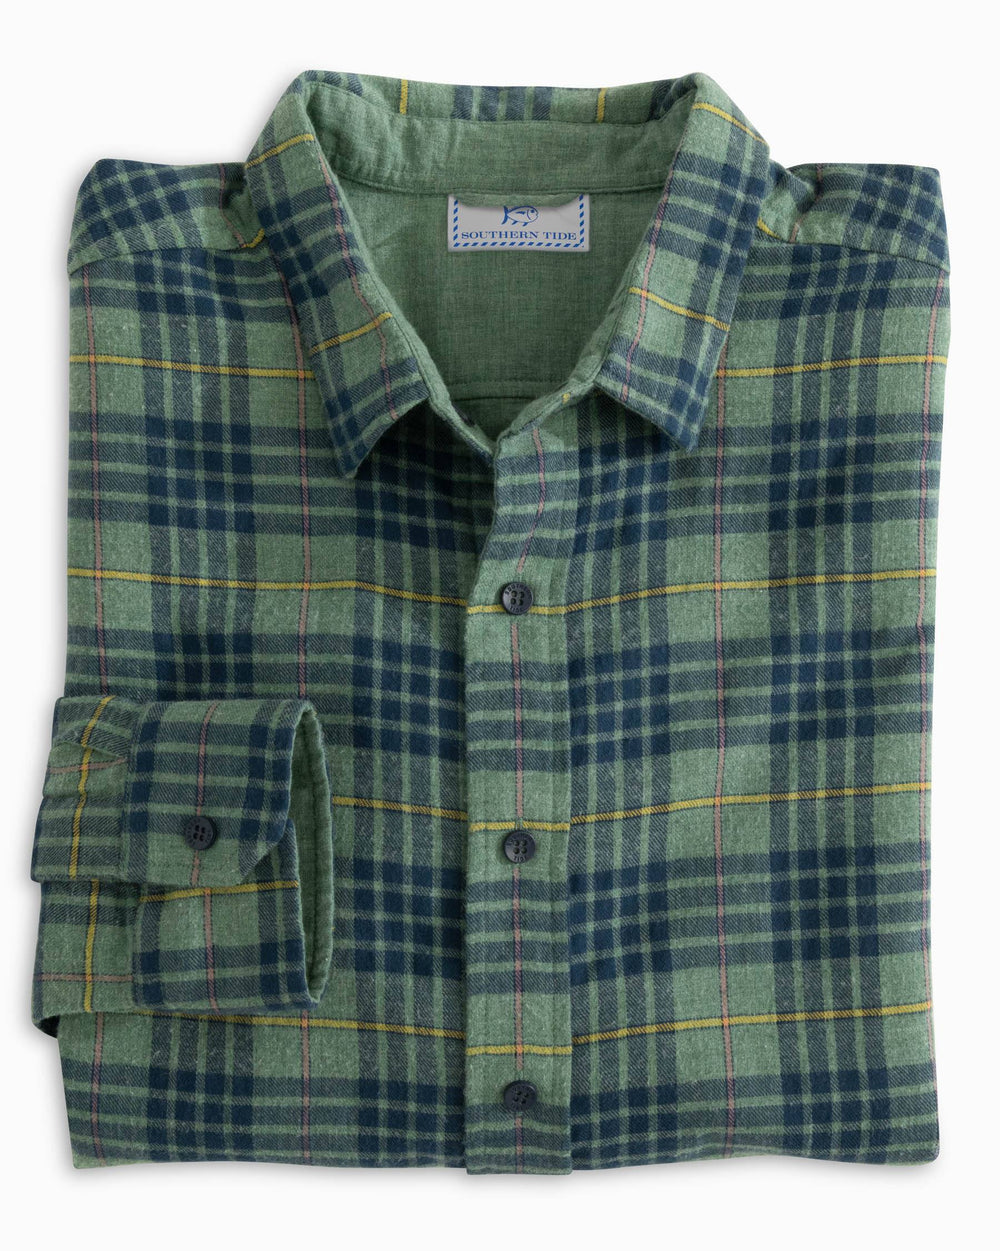 The folded view of the Southern Tide Payton Heather Reversible Plaid Sport Shirt by Southern Tide - Heather Dark Ivy